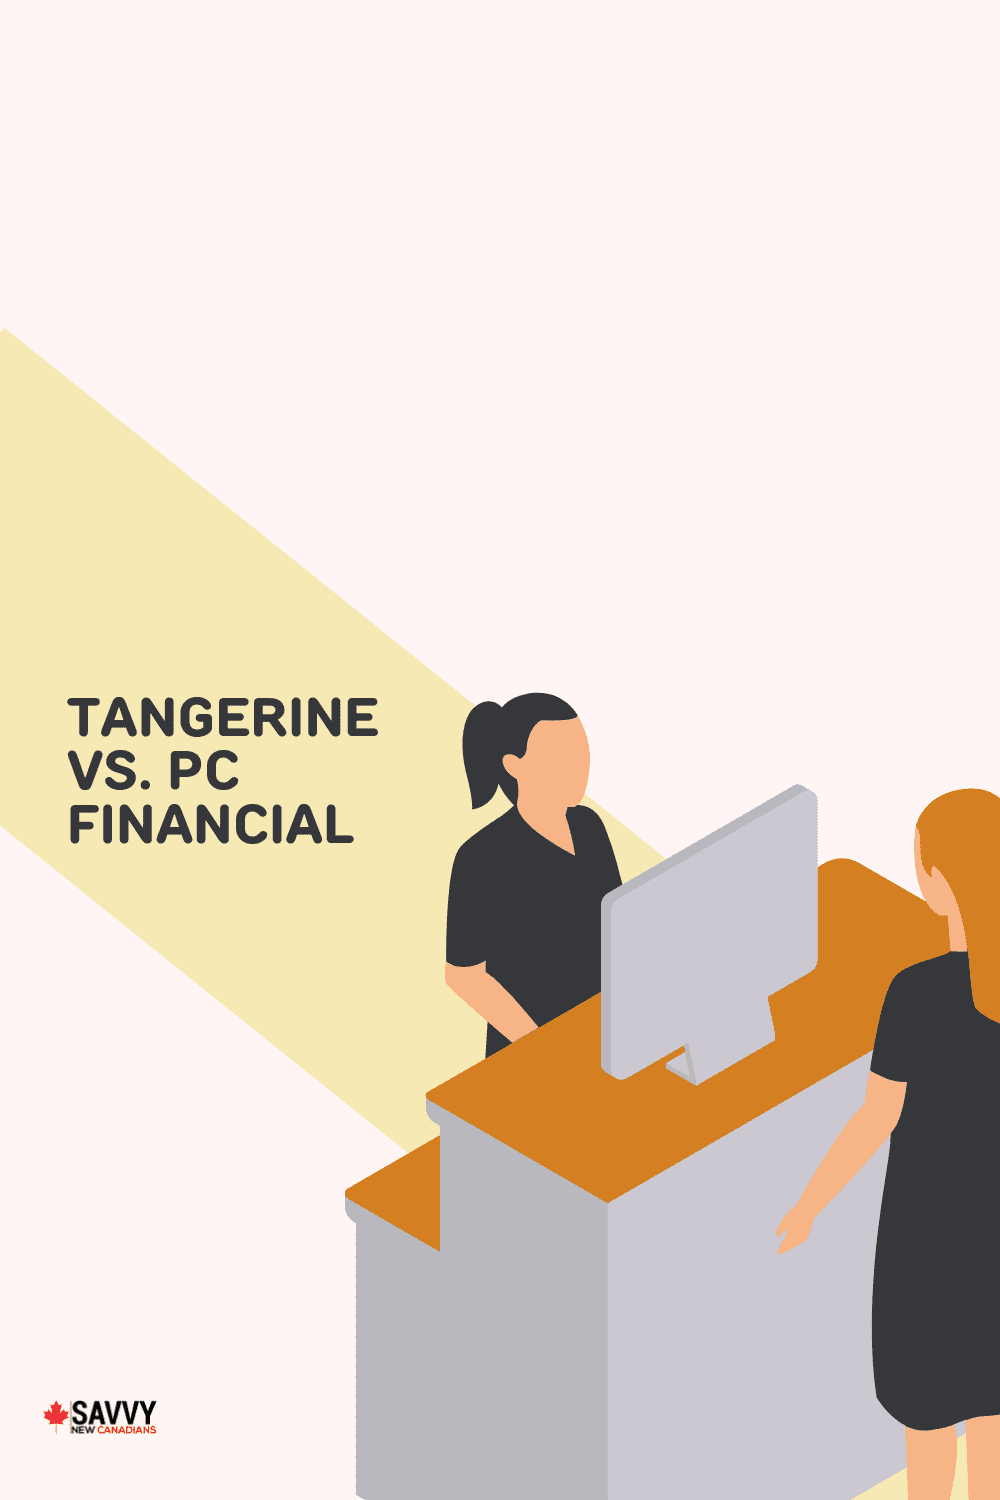 Tangerine vs. PC Financial 2022: How Do They Compare?